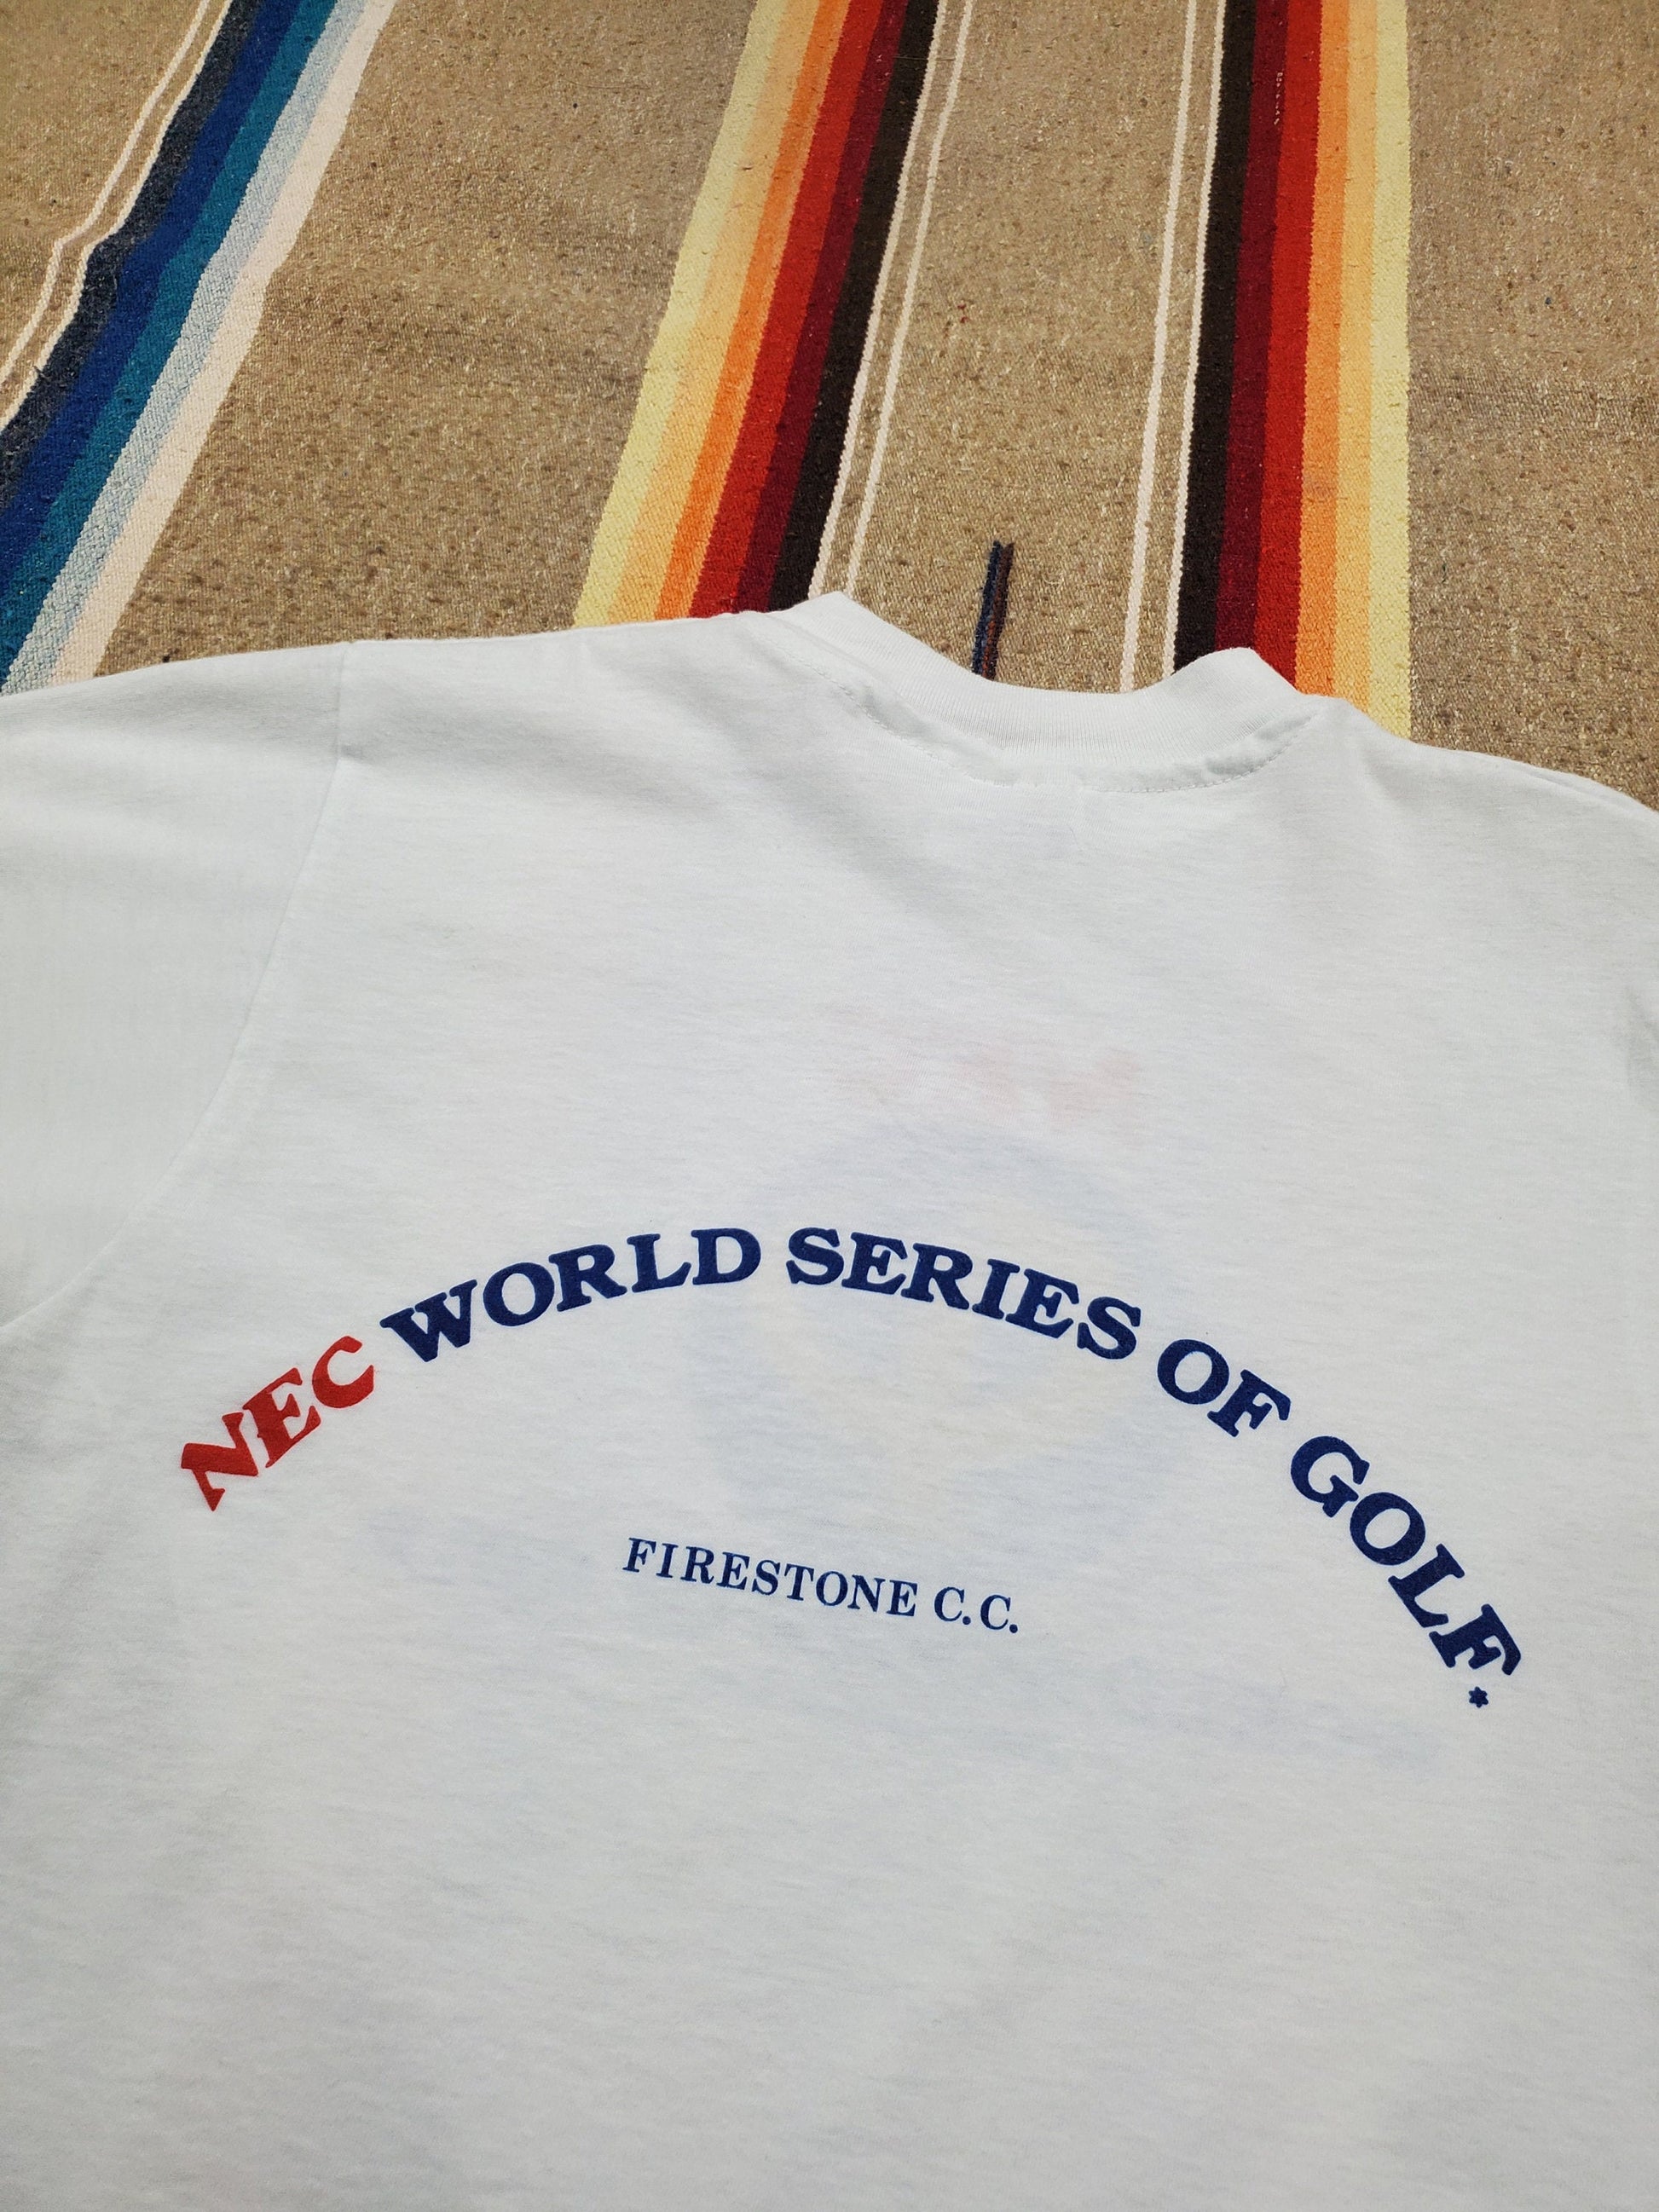 1980s Hanes NEC World Series of Golf Firestone Country Club Akron Ohio Souvenir T-Shirt Made in USA Size S